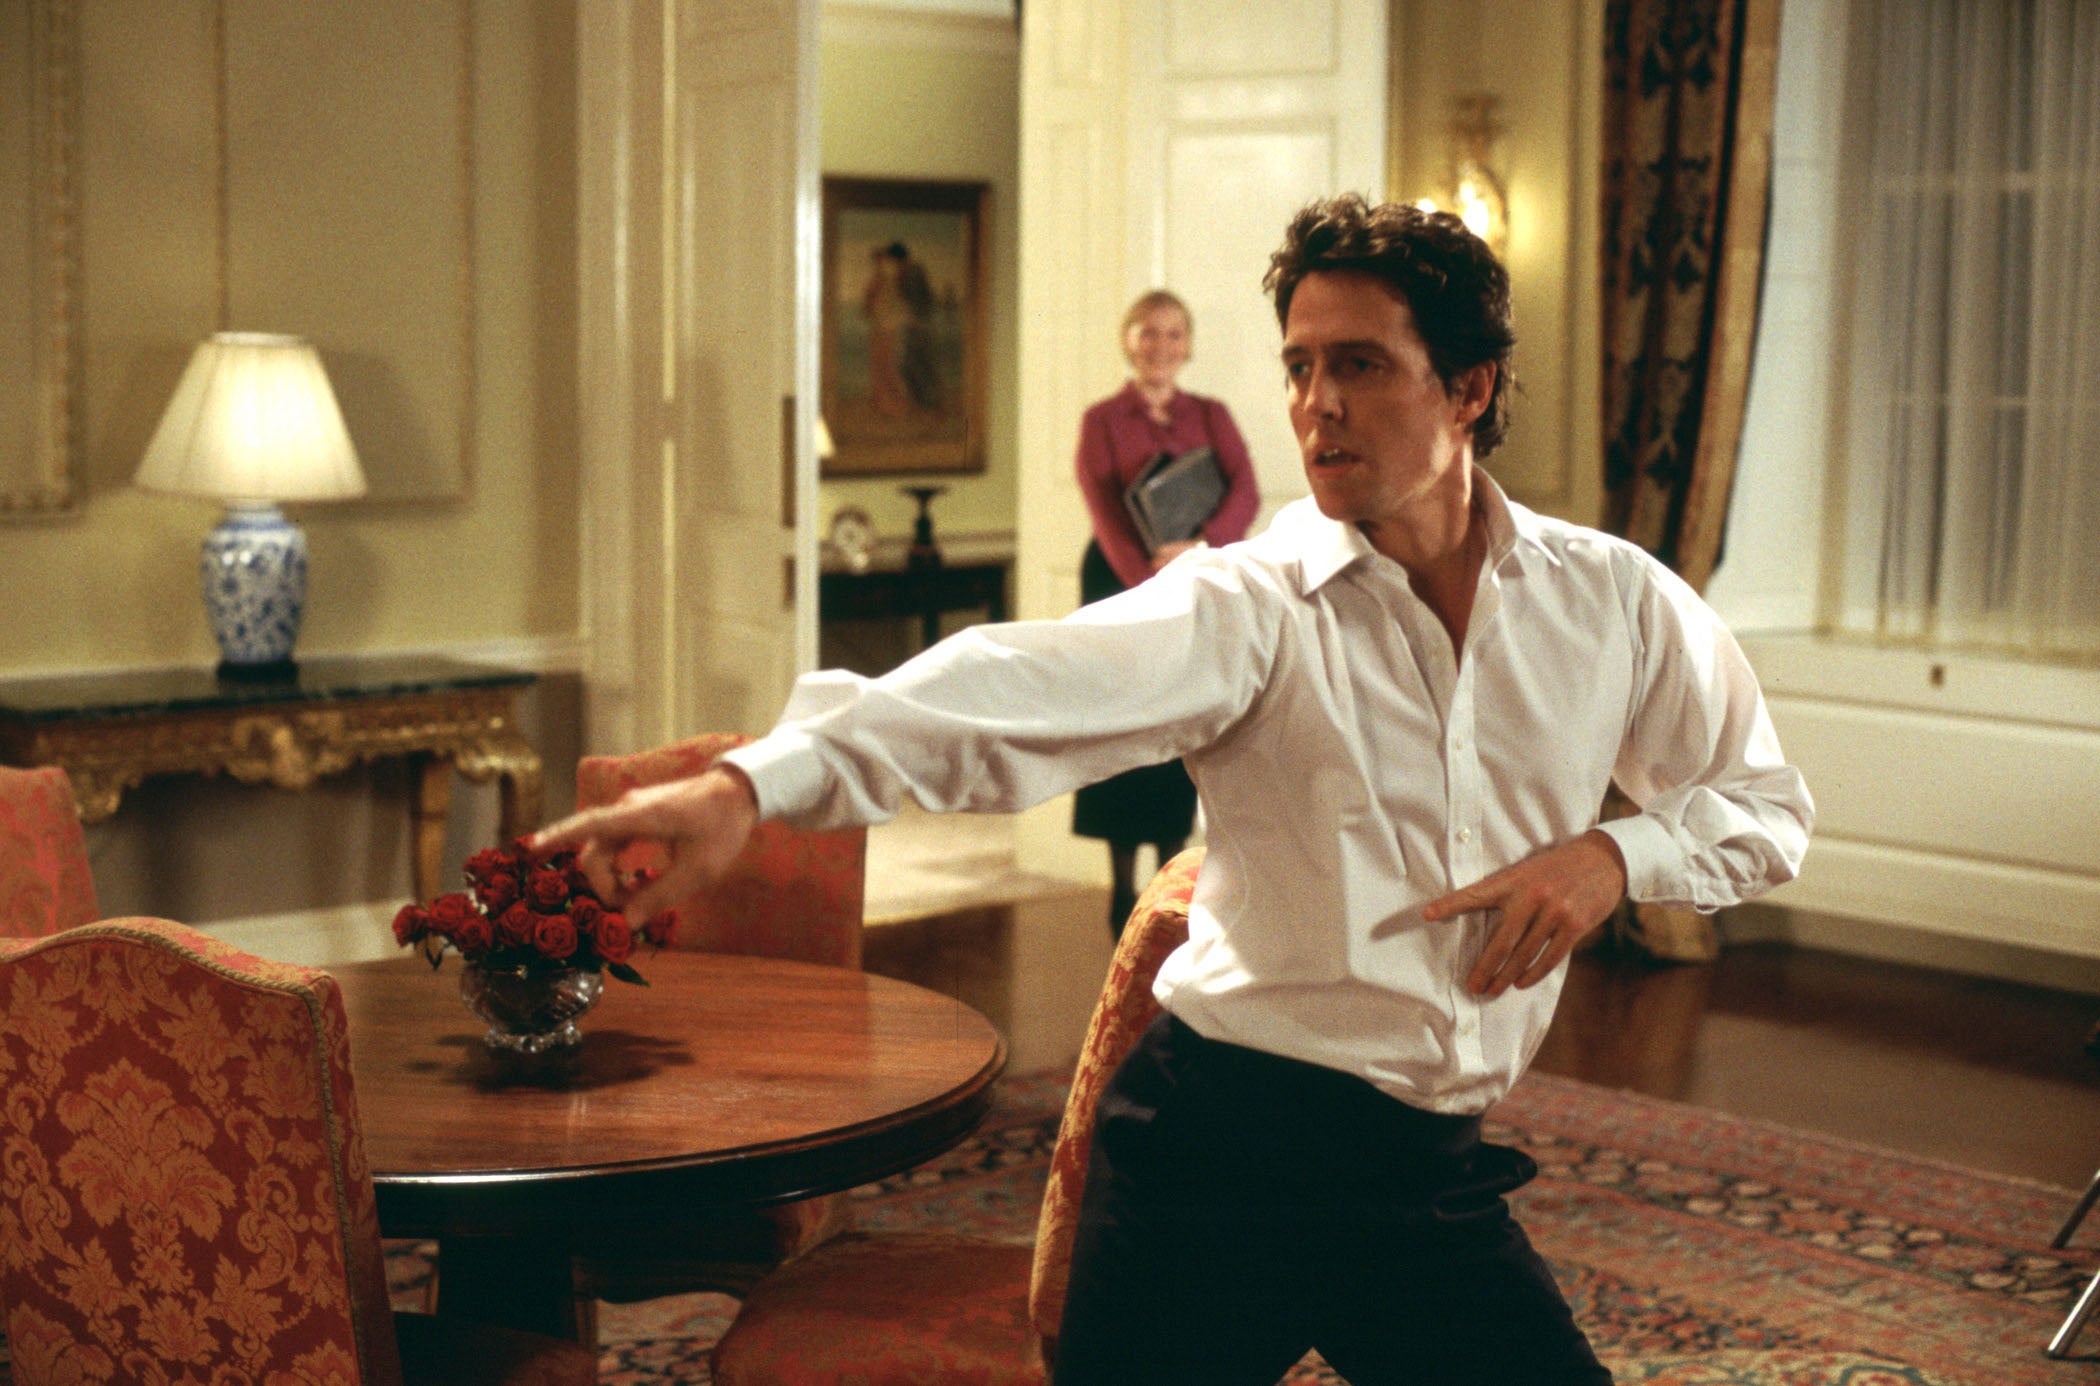 Hugh Grant dances as a fictional PM in ‘Love Actually’ (Universal/Dna/Working Title/Kobal/Shutterstock)